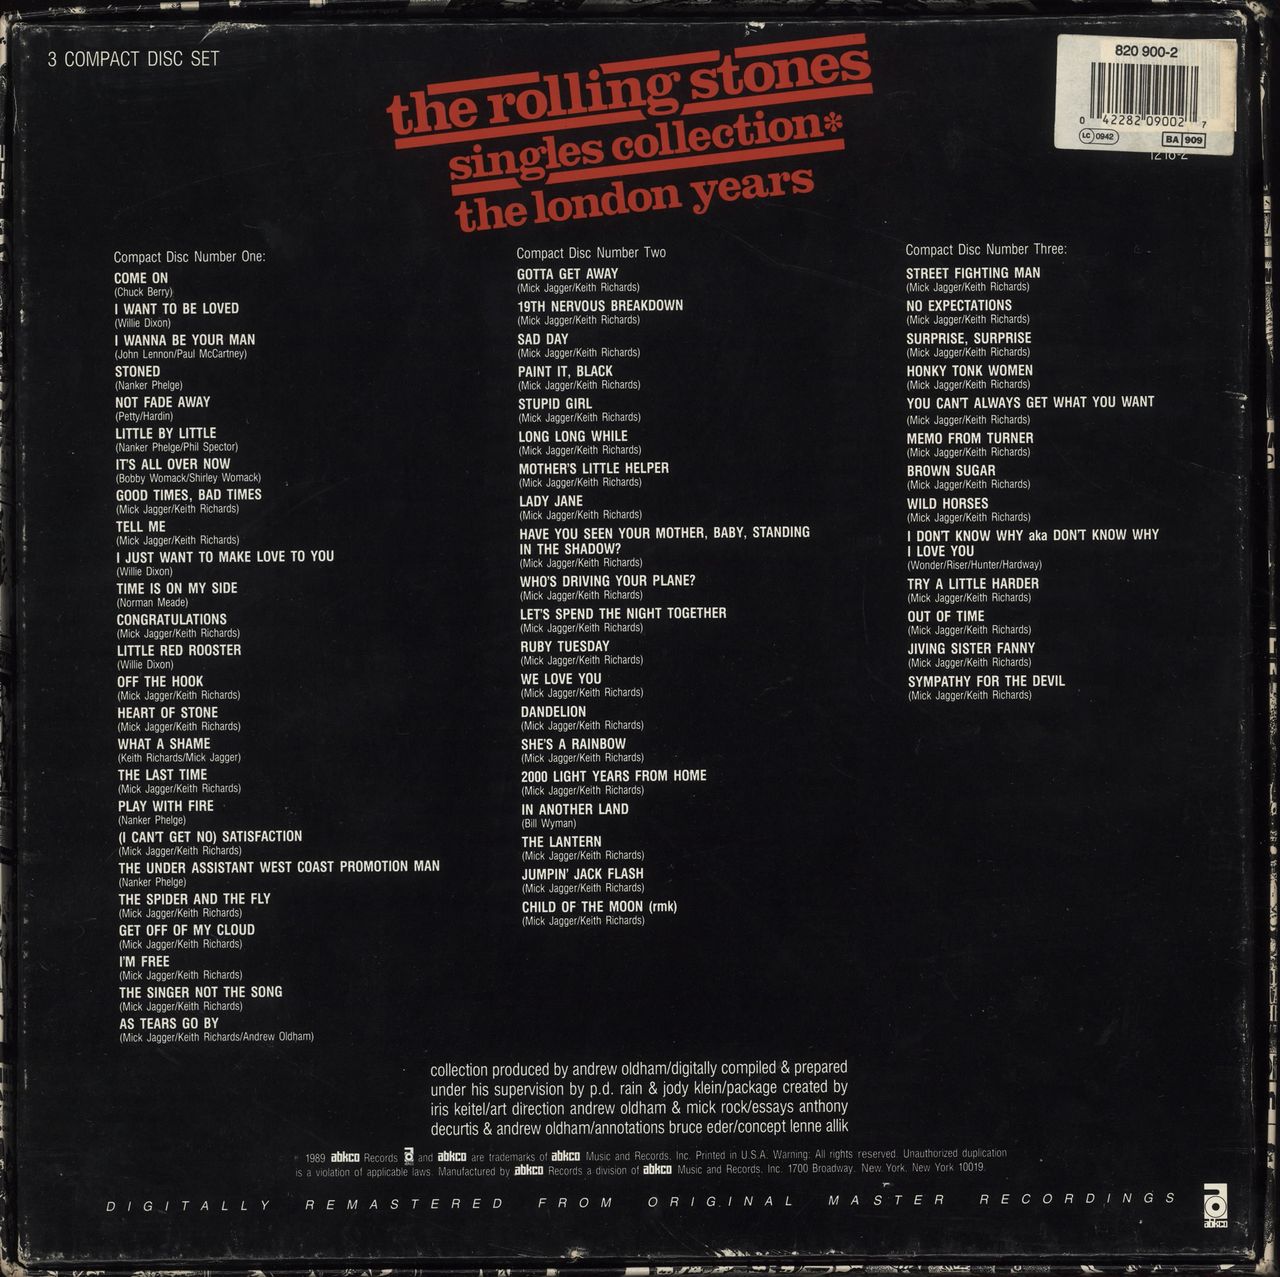 The Rolling Stones Singles Collection - The London Years US Cd album b —  RareVinyl.com